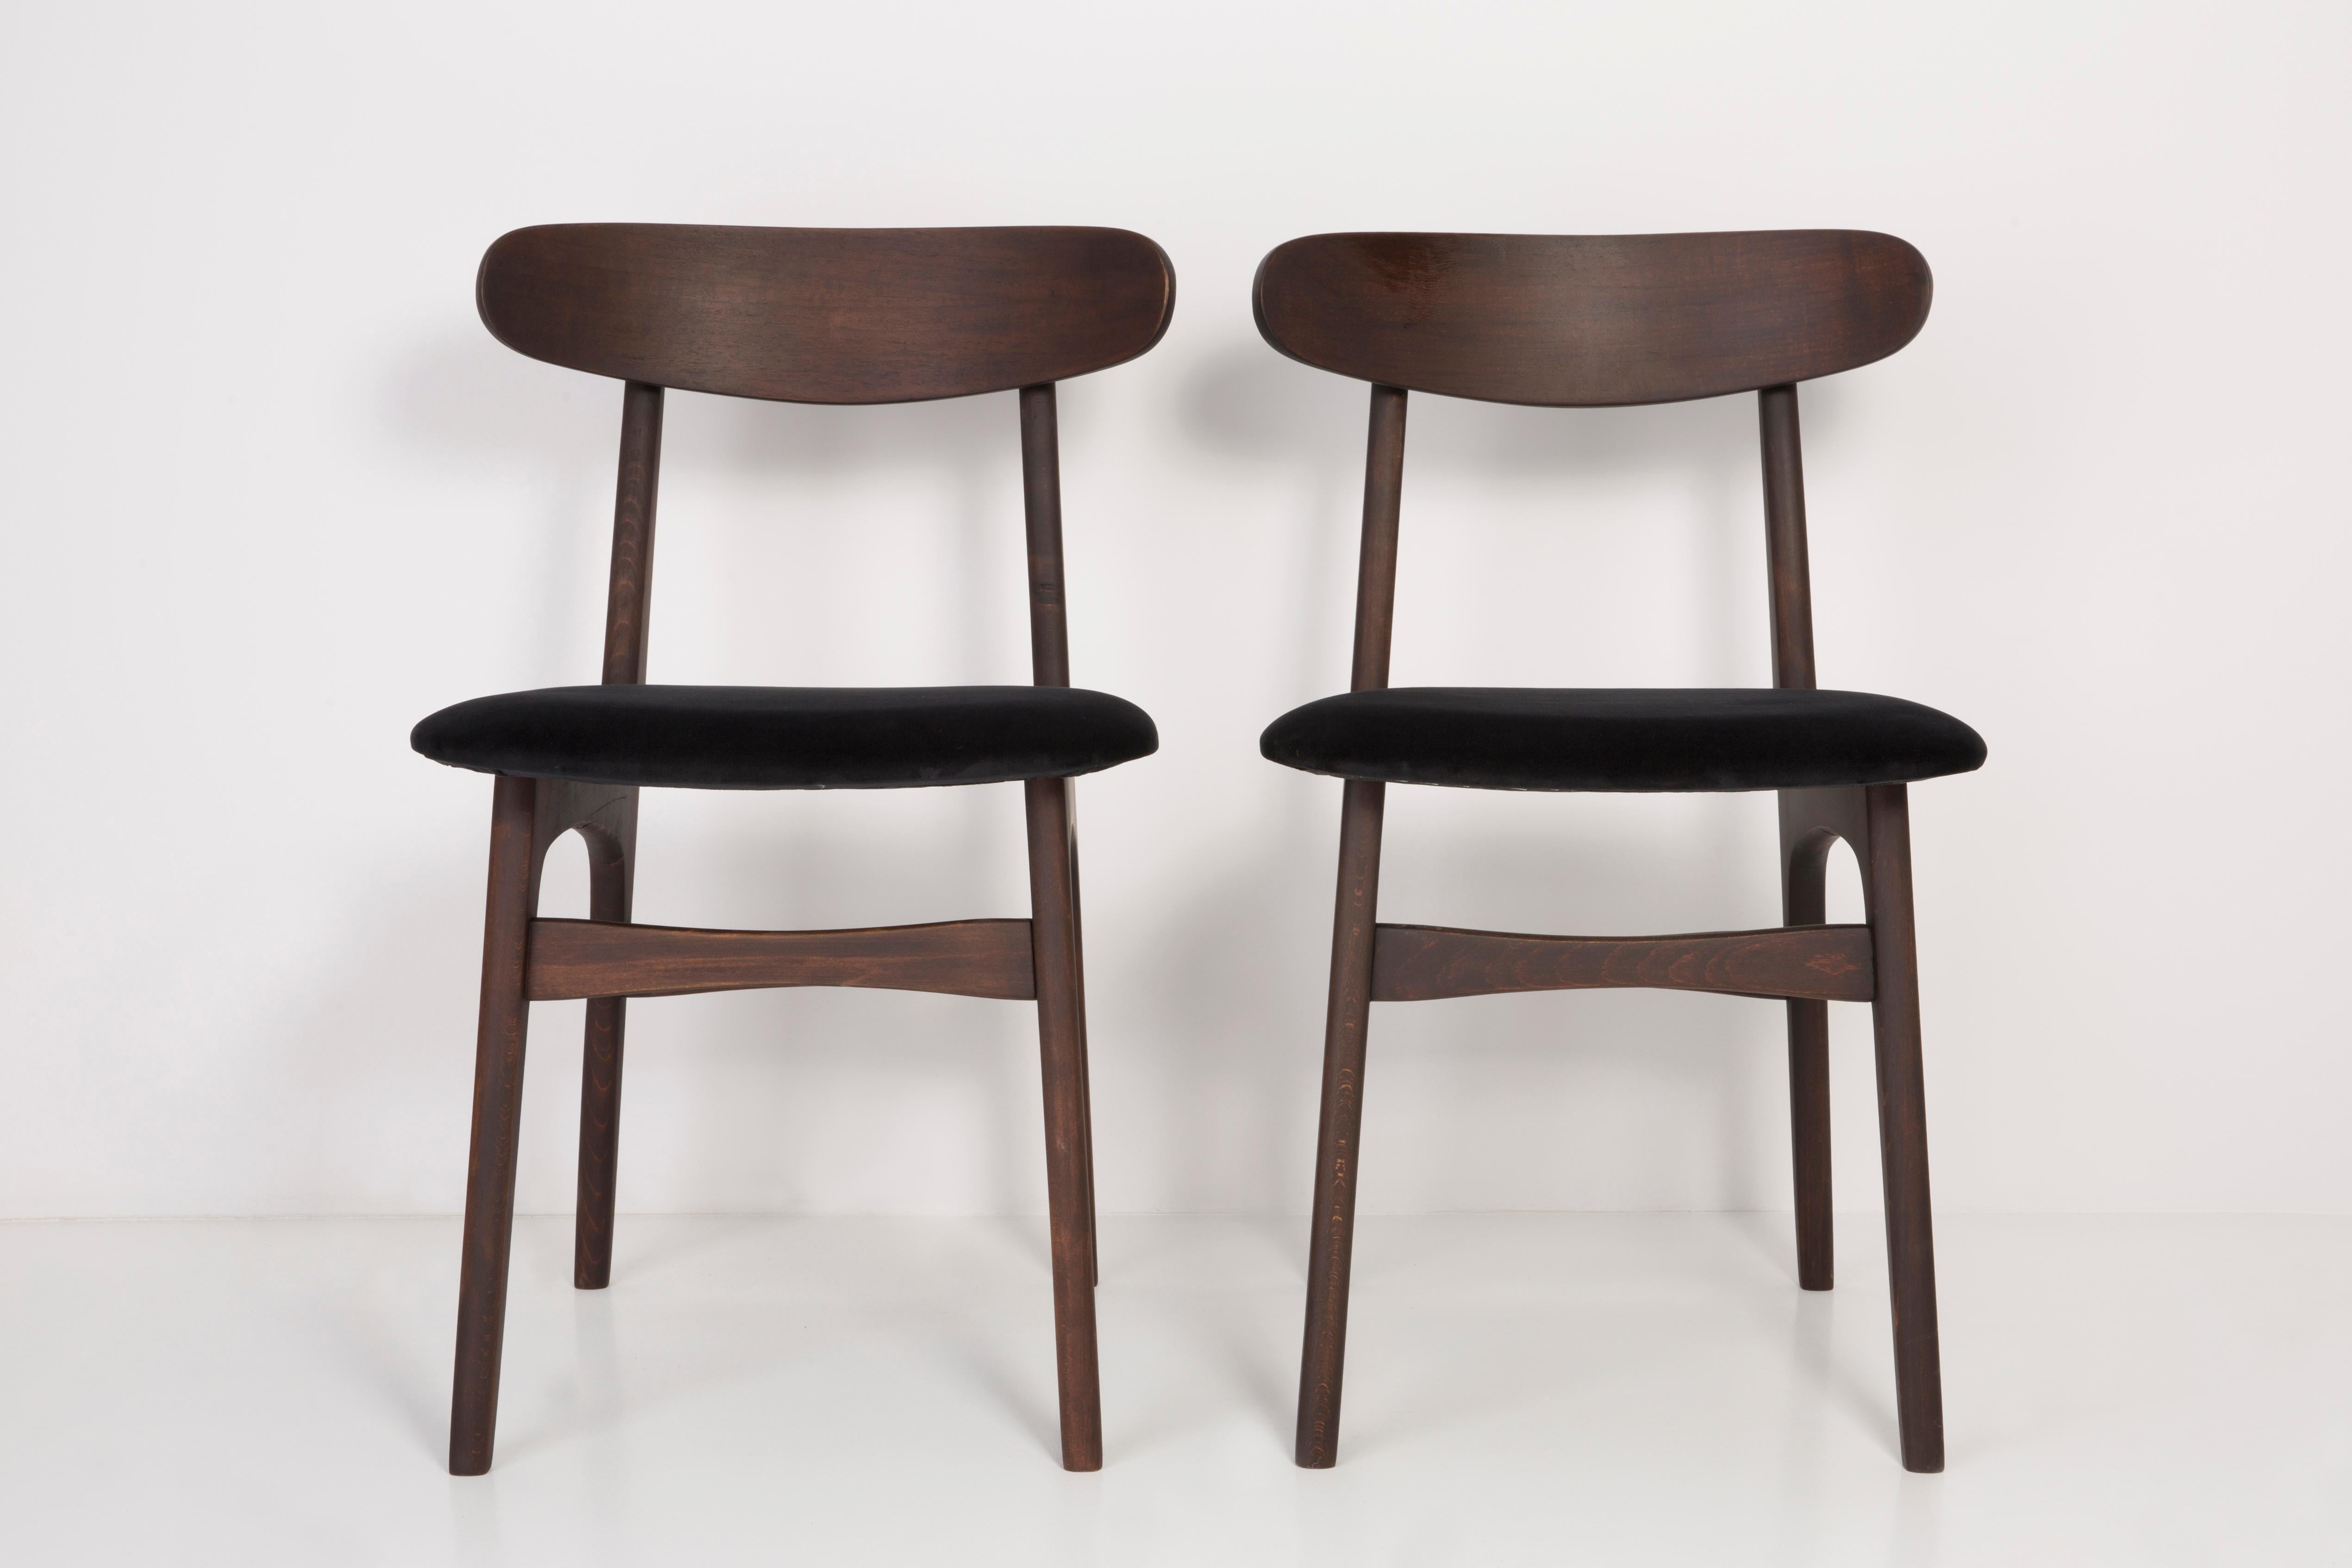 Chairs designed by Prof. Rajmund Halas. Made of beechwood. Chair is after a complete upholstery renovation, the woodwork has been refreshed. Seat and back is dressed in black, durable and pleasant to the touch velvet fabric. Chair is stabile and